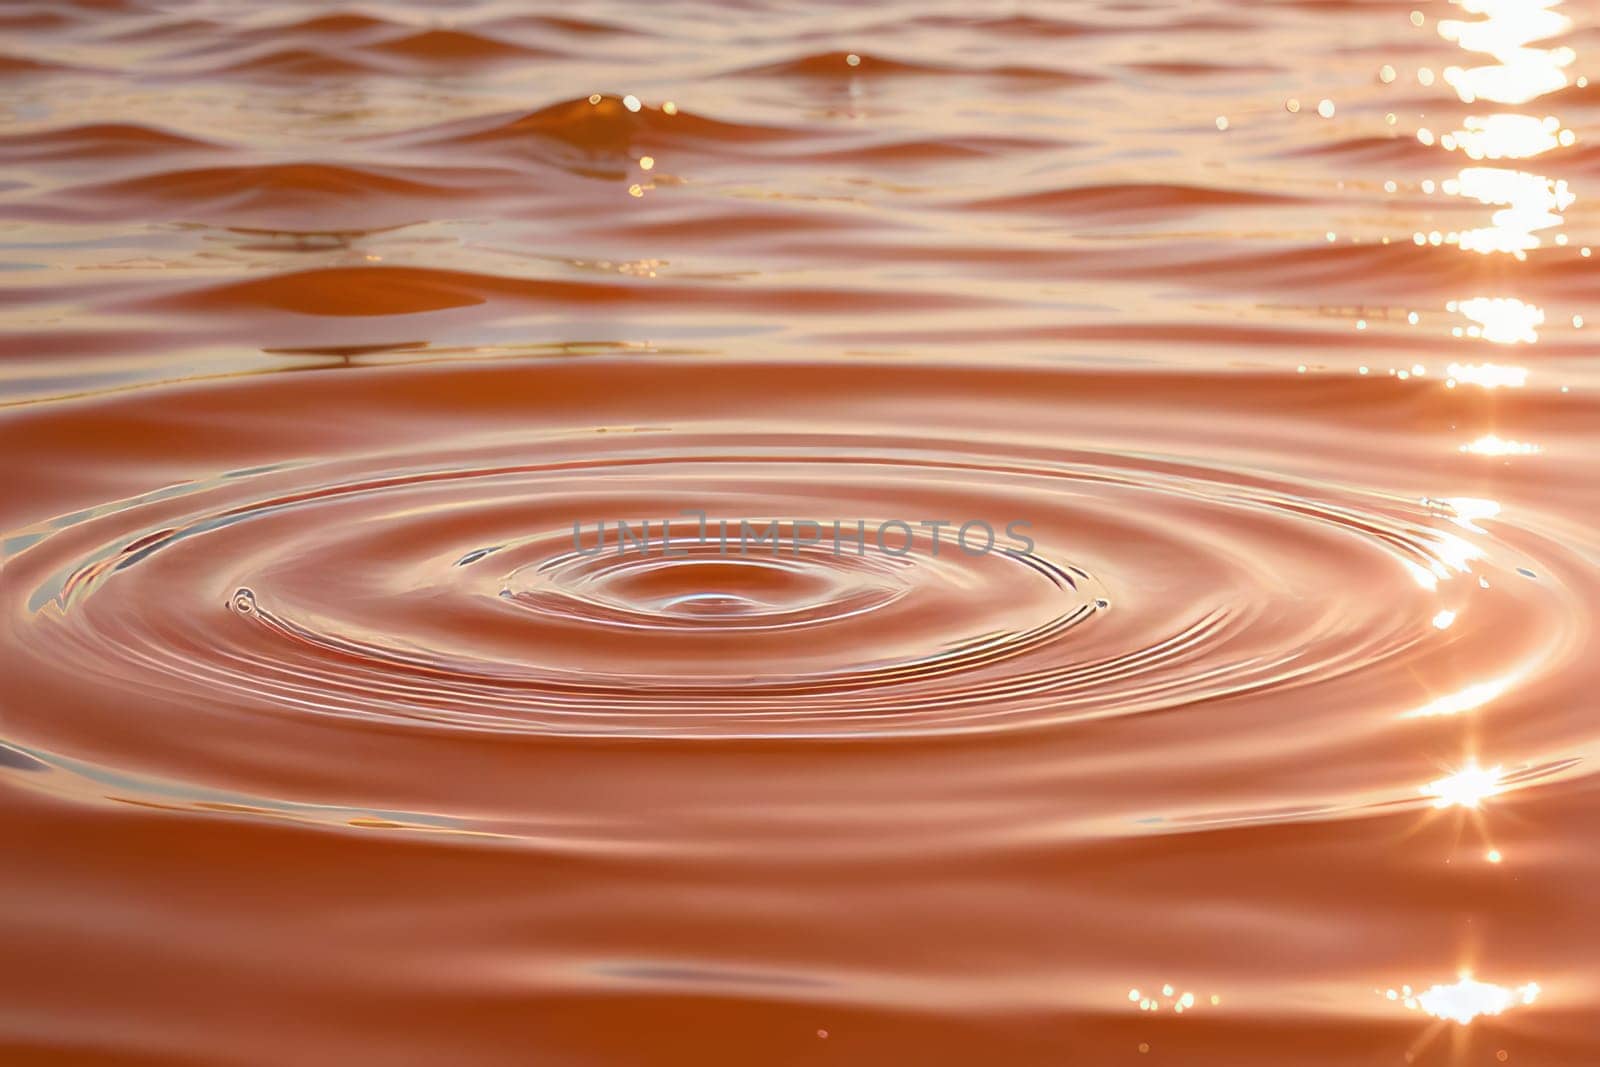 Circles and waves on peach-colored water in sunlight Abstract natural background. Demonstrating the colors of 2024 - Peach Fuzz